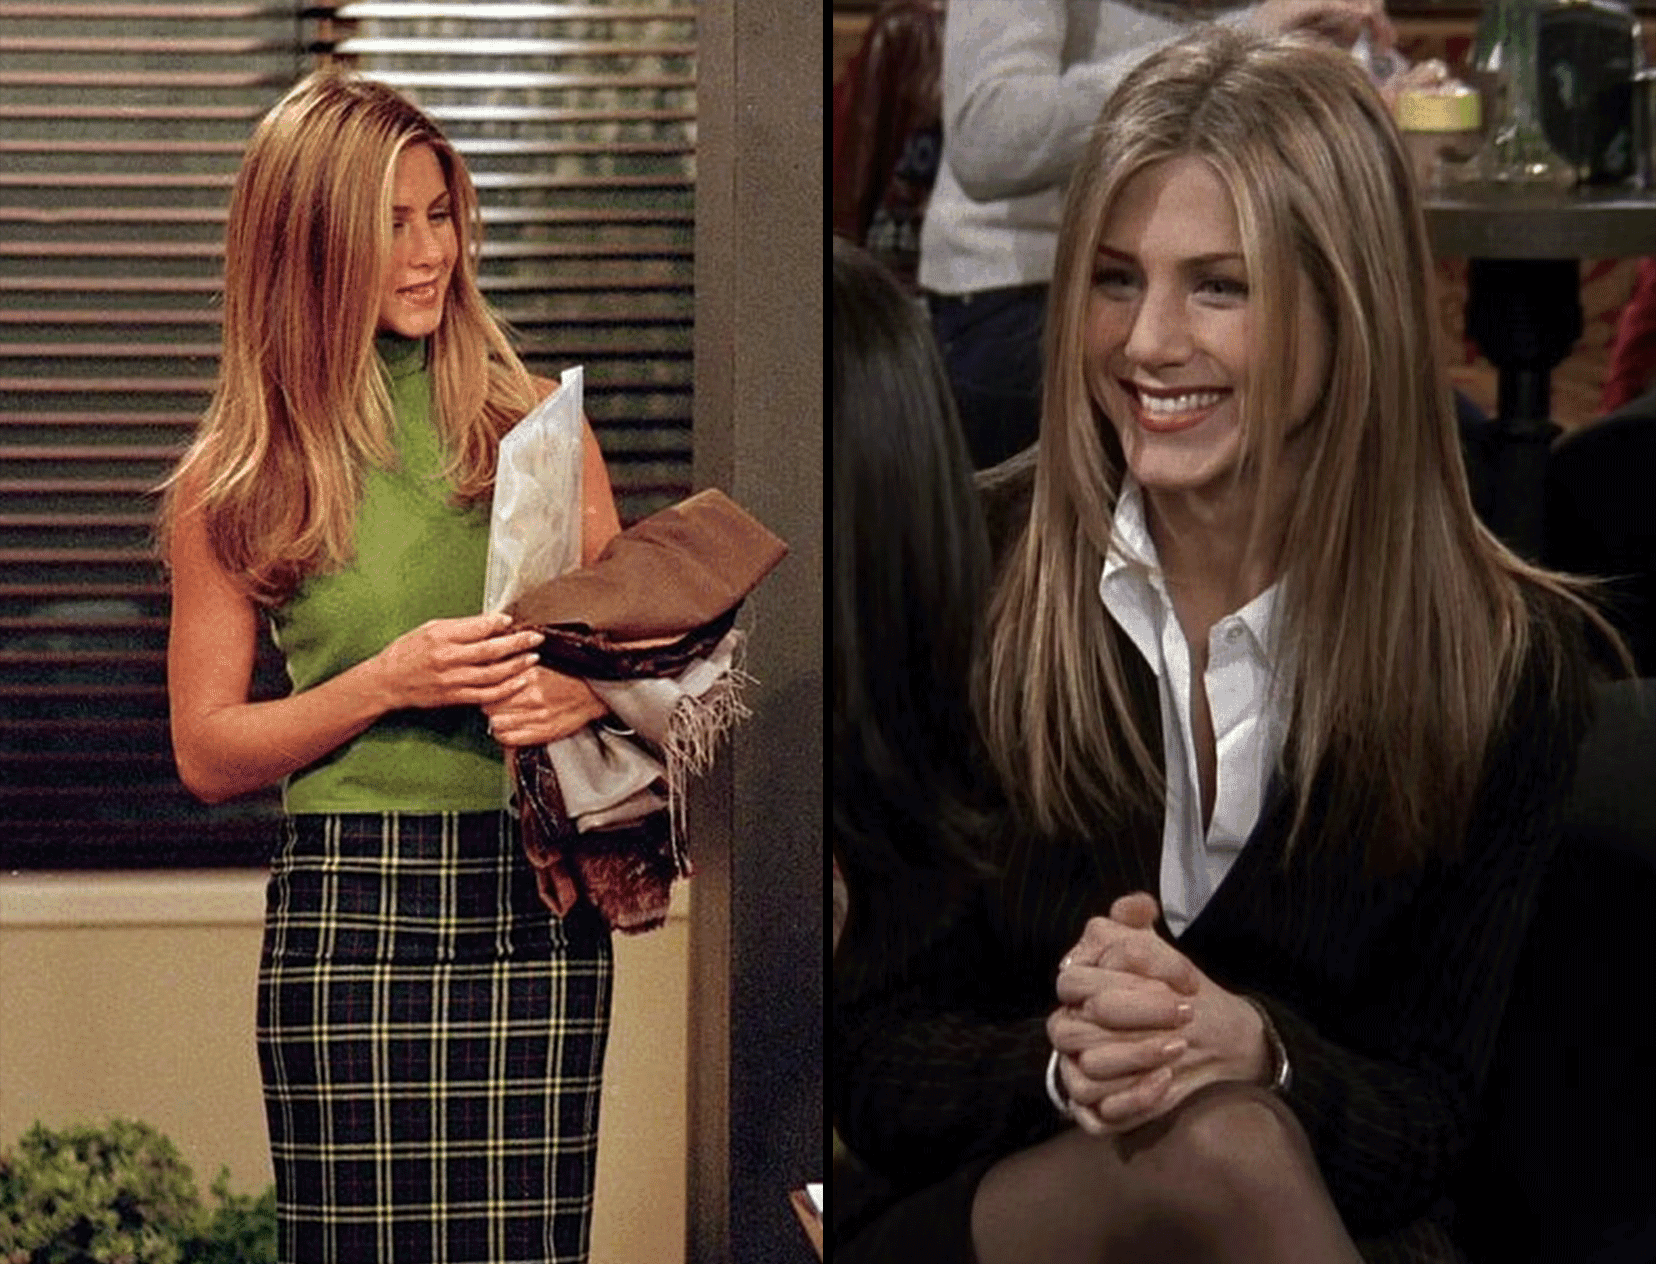 I’m Not A Fashion Enthusiast, But I Just Can’t Resist Rachel Green’s FRIENDS Wardrobe. Here’s Why